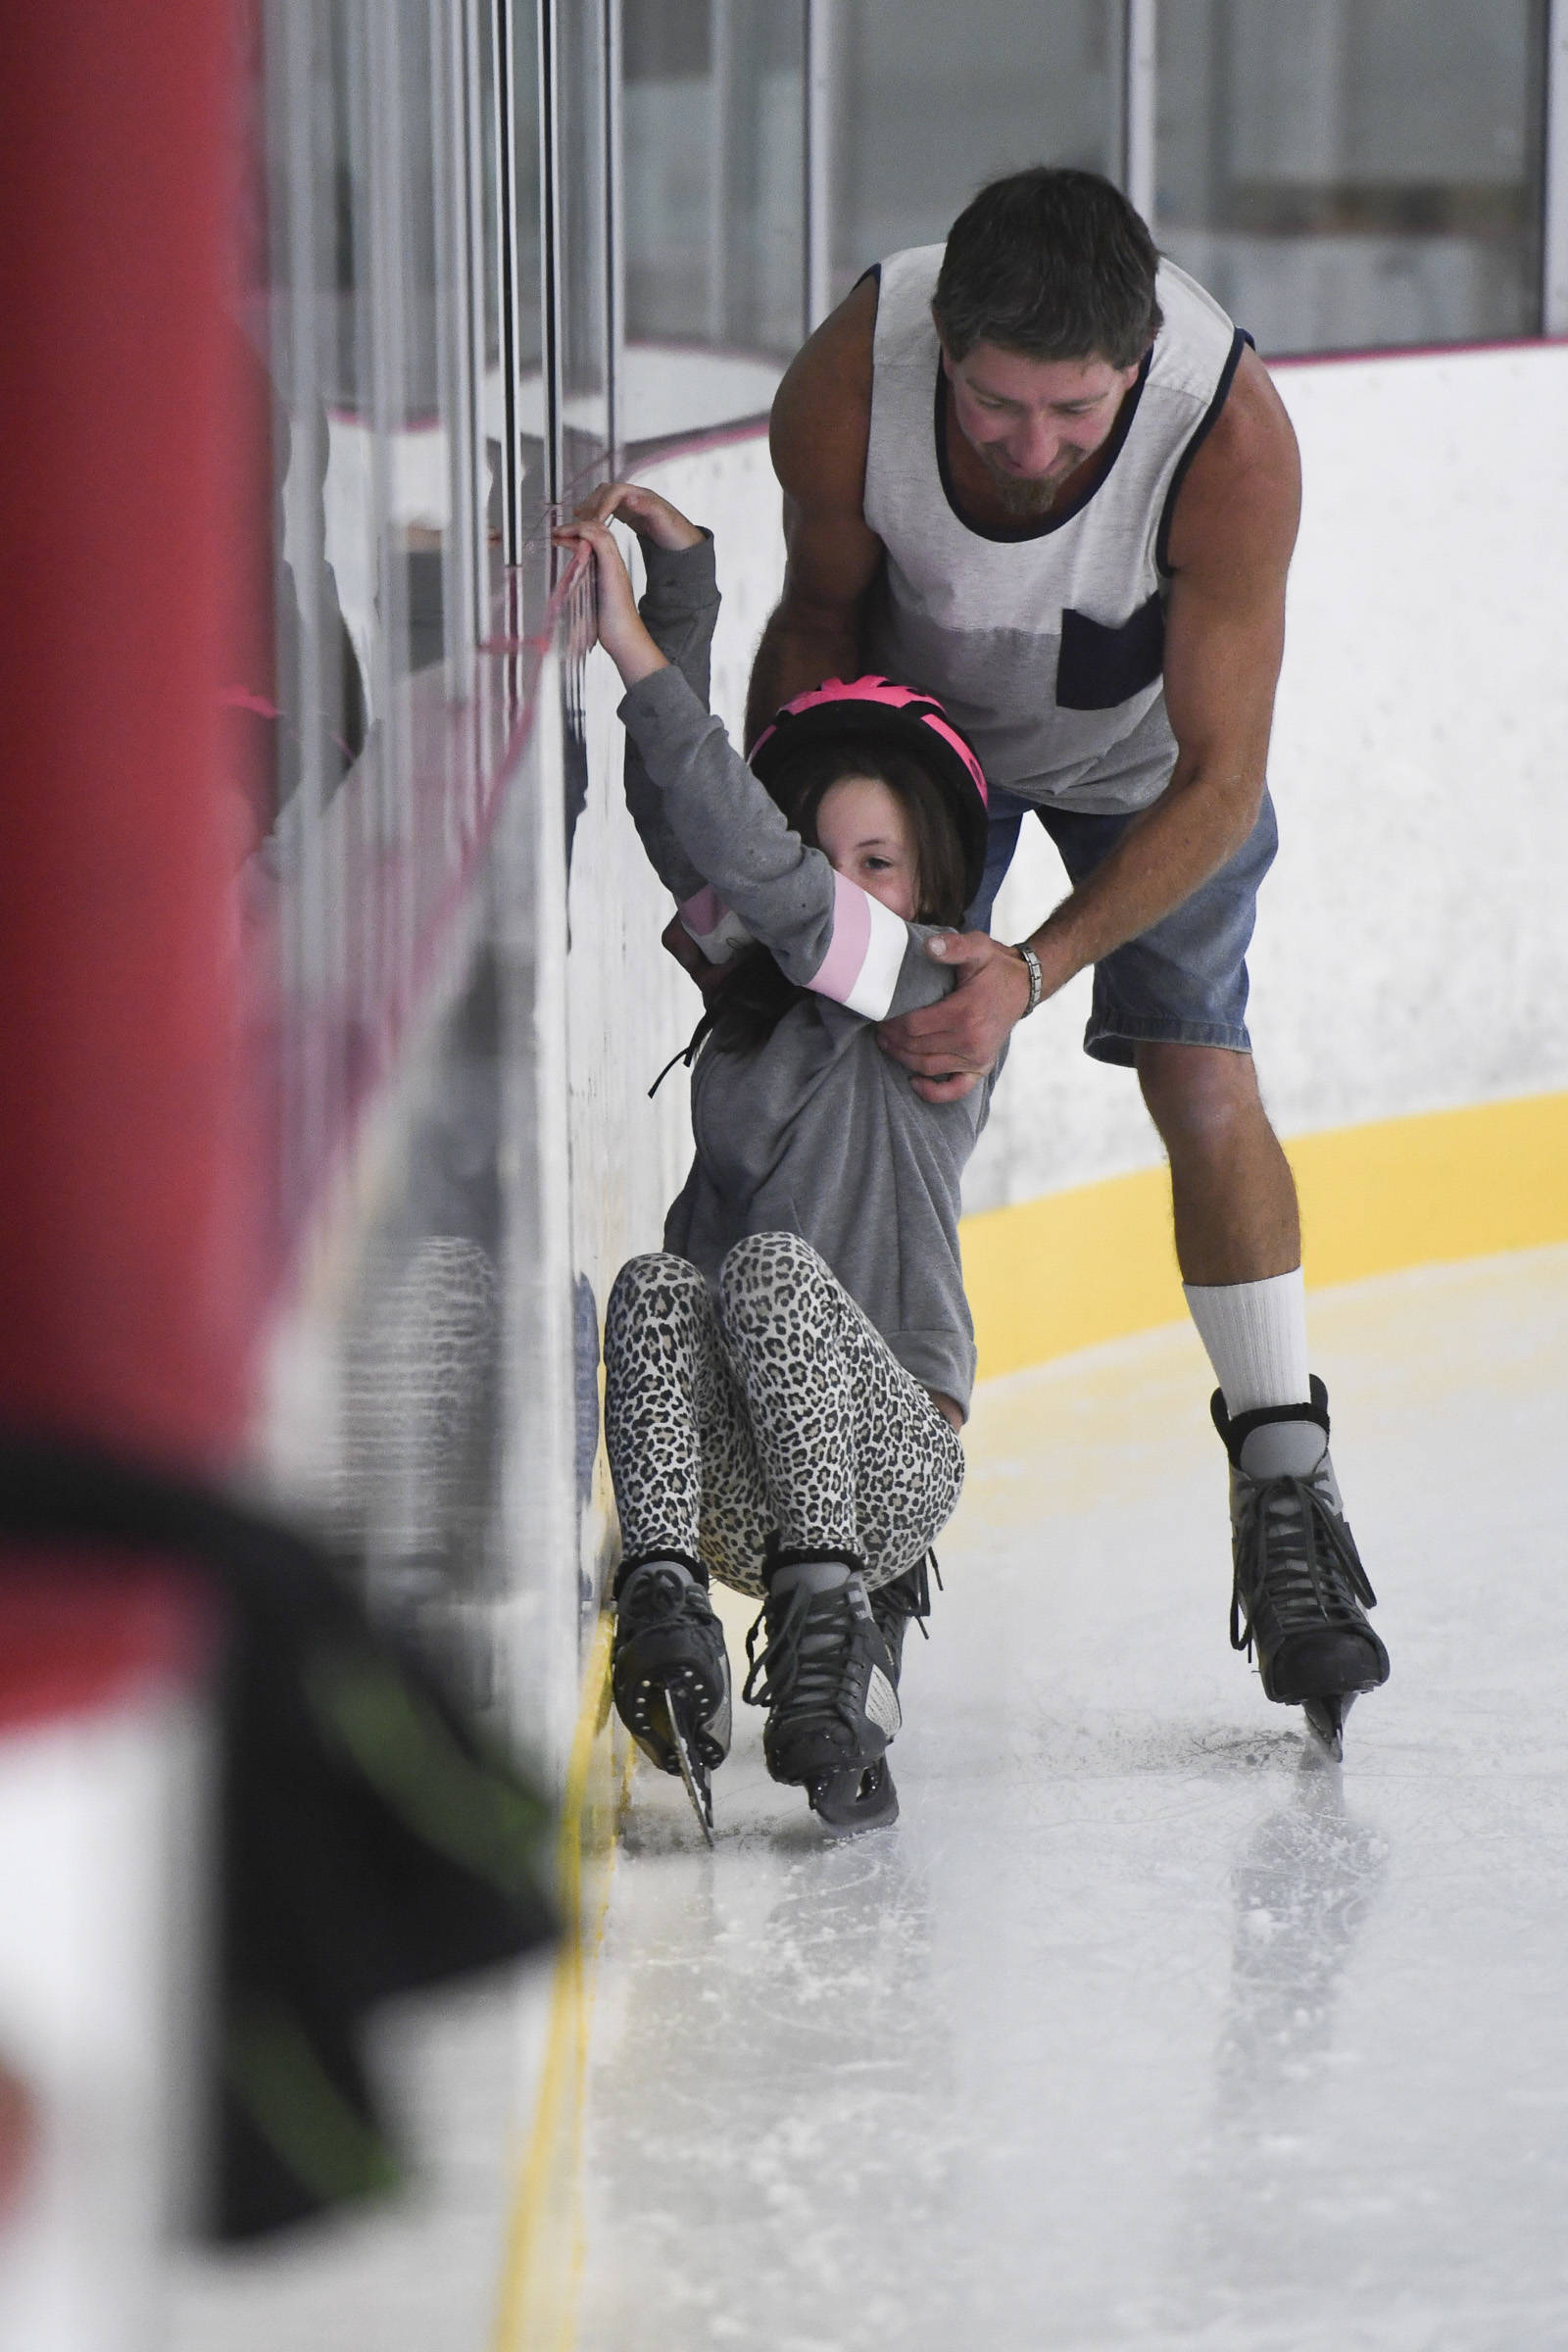 Justin McGeehan helps his daughter, Scarlett learn to skate during a free skate on the opening day at the Treadwell Arena on Monday, Aug. 5, 2019. (Michael Penn | Juneau Empire)